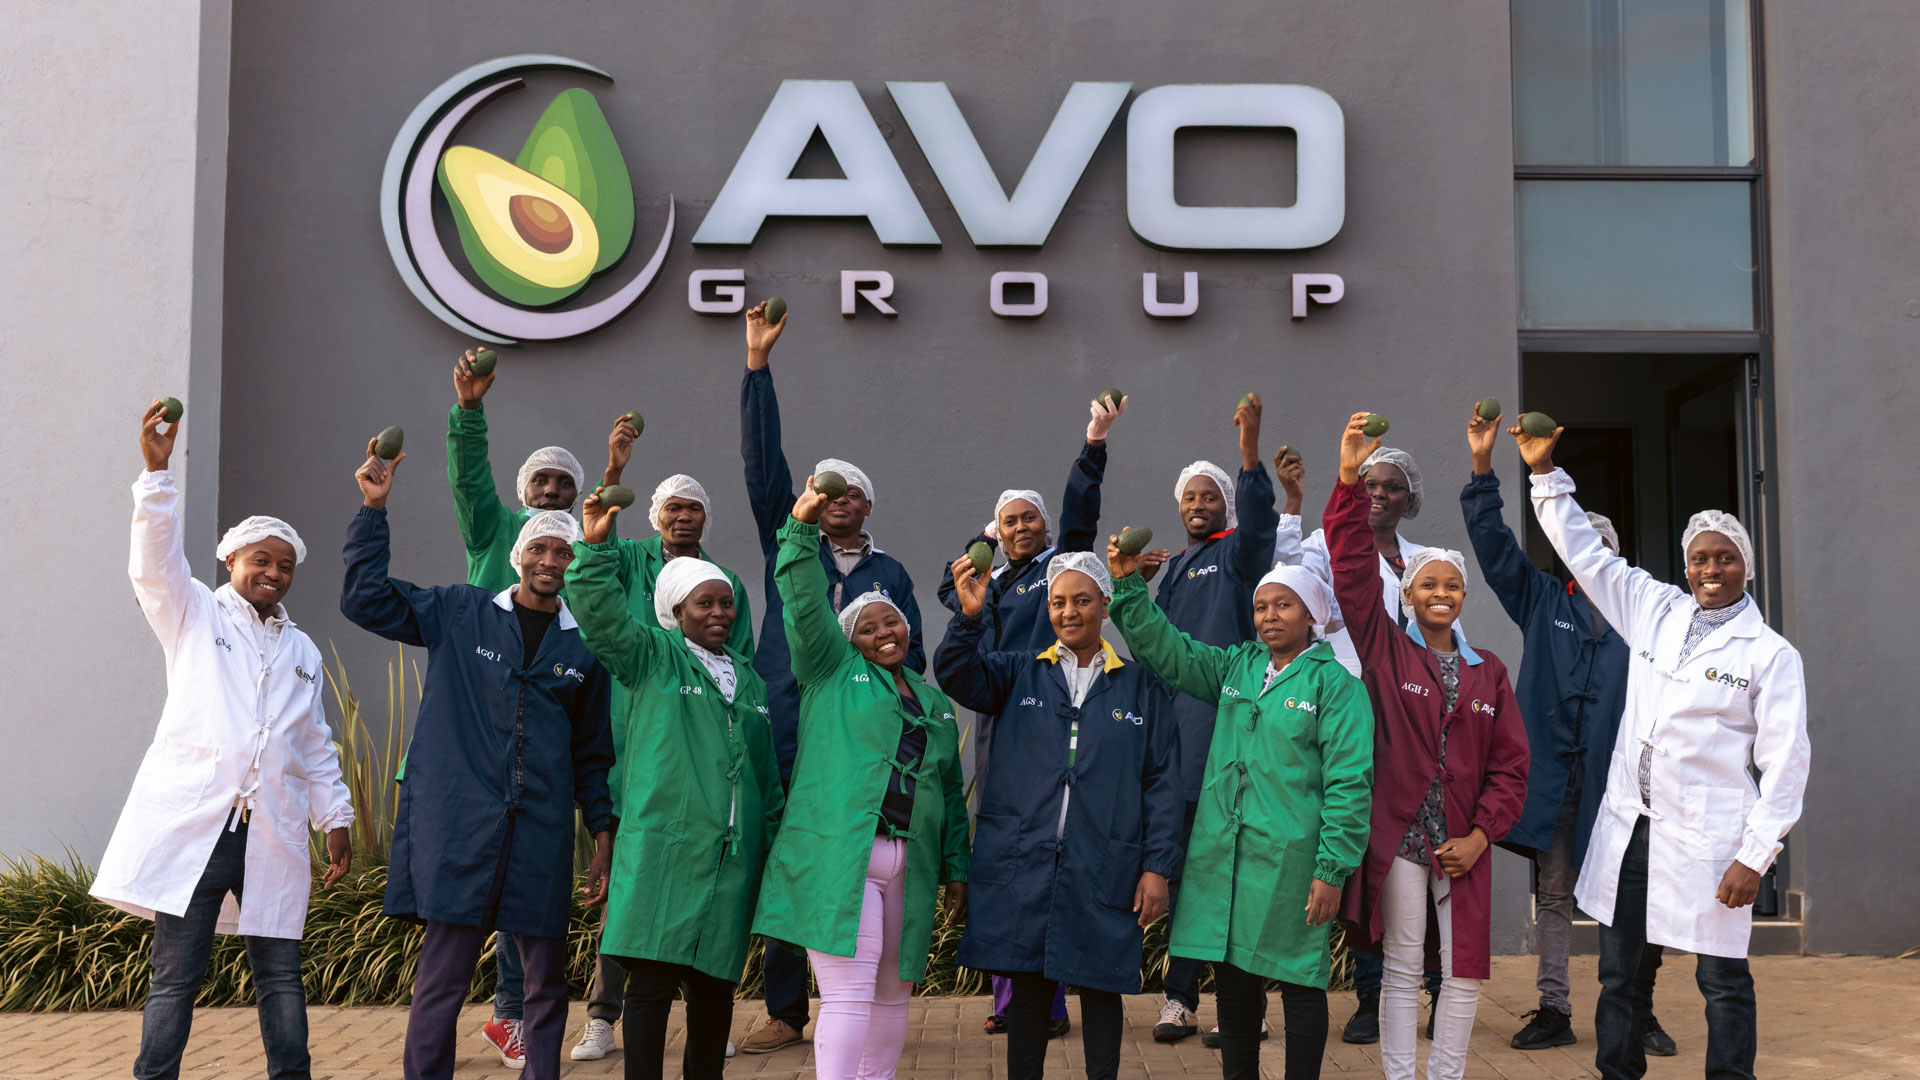 The team celebrating our progress and development of AVO GROUP.